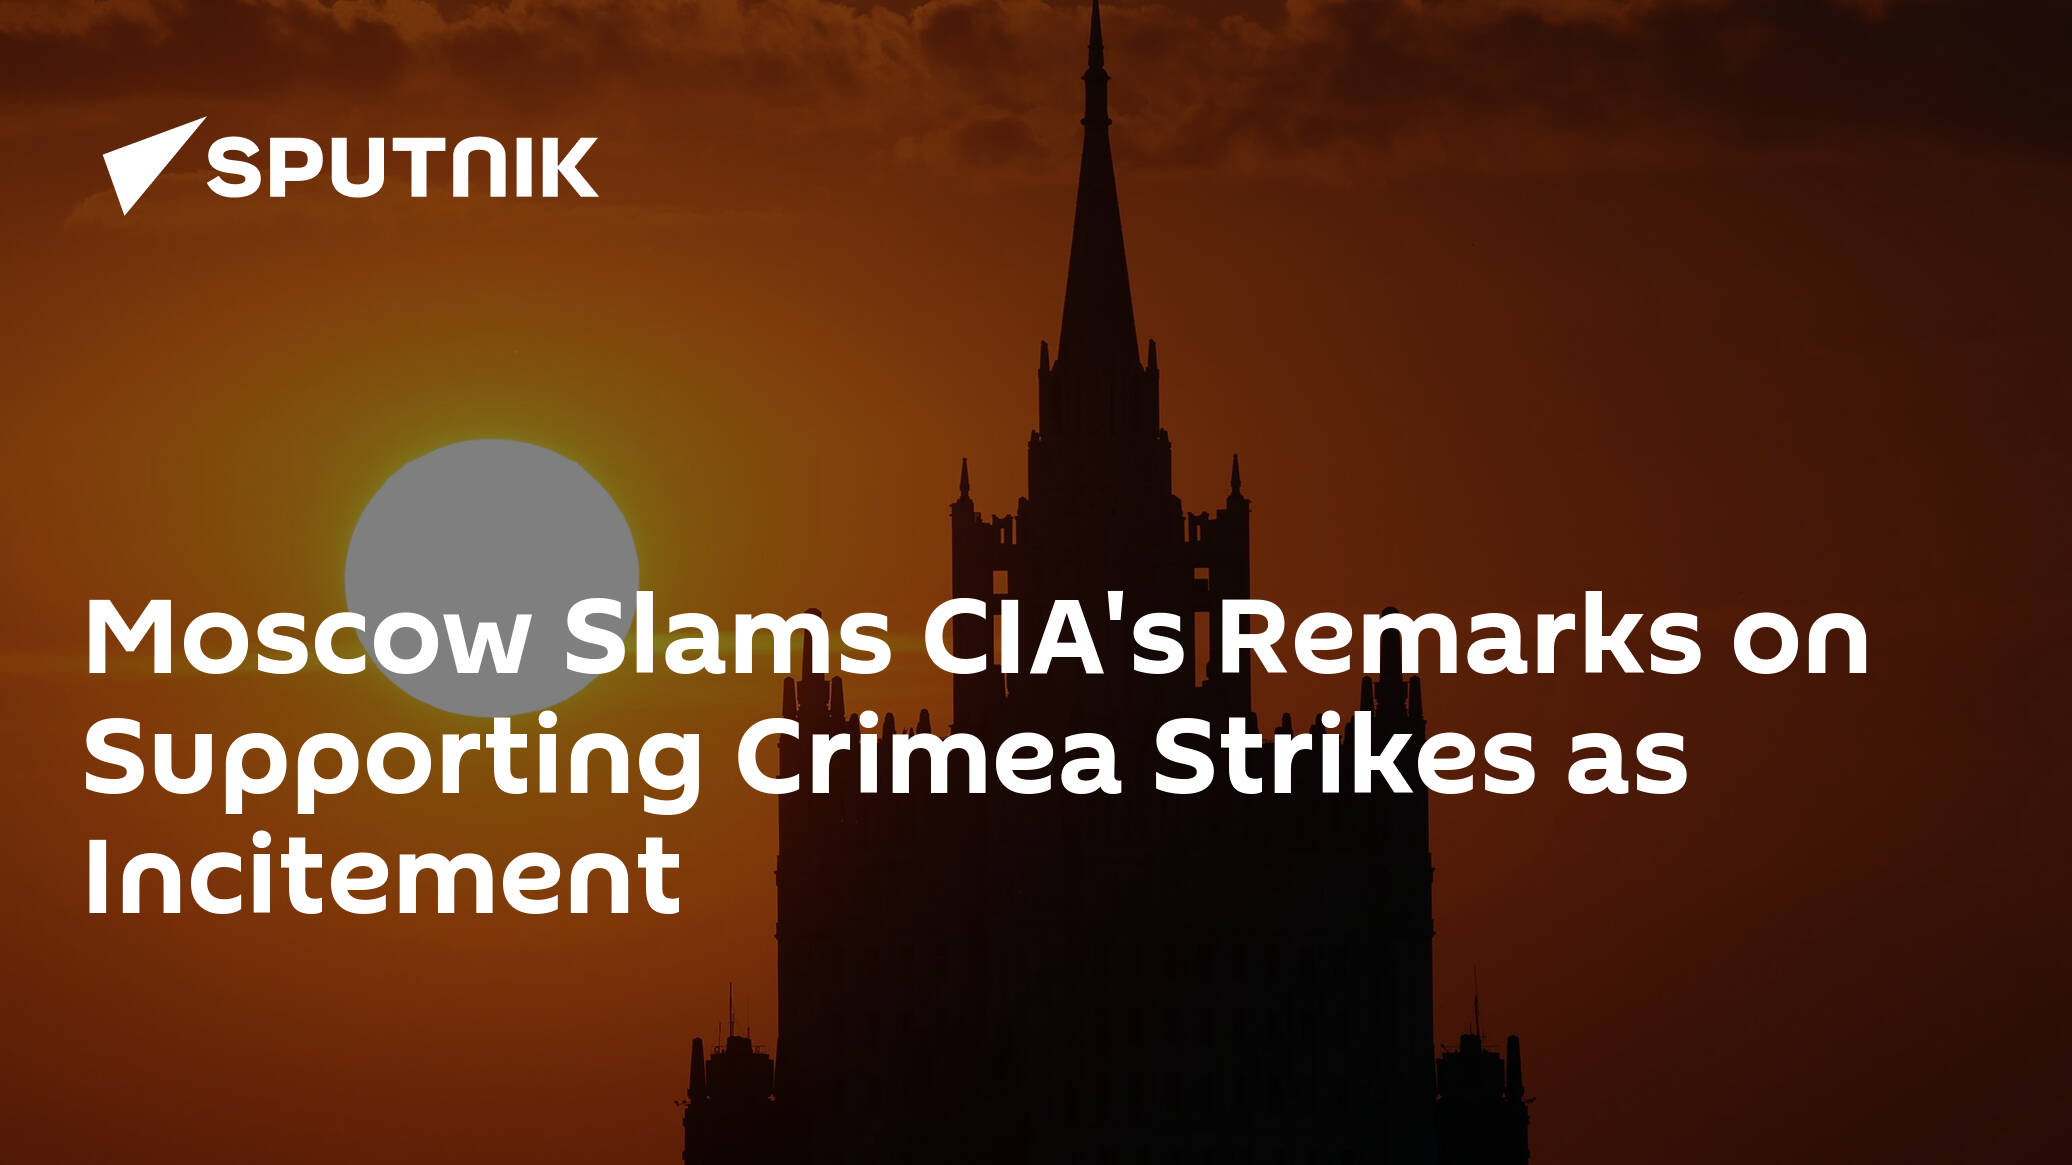 Moscow Slams CIA's Remarks on Supporting Crimea Strikes as Incitement